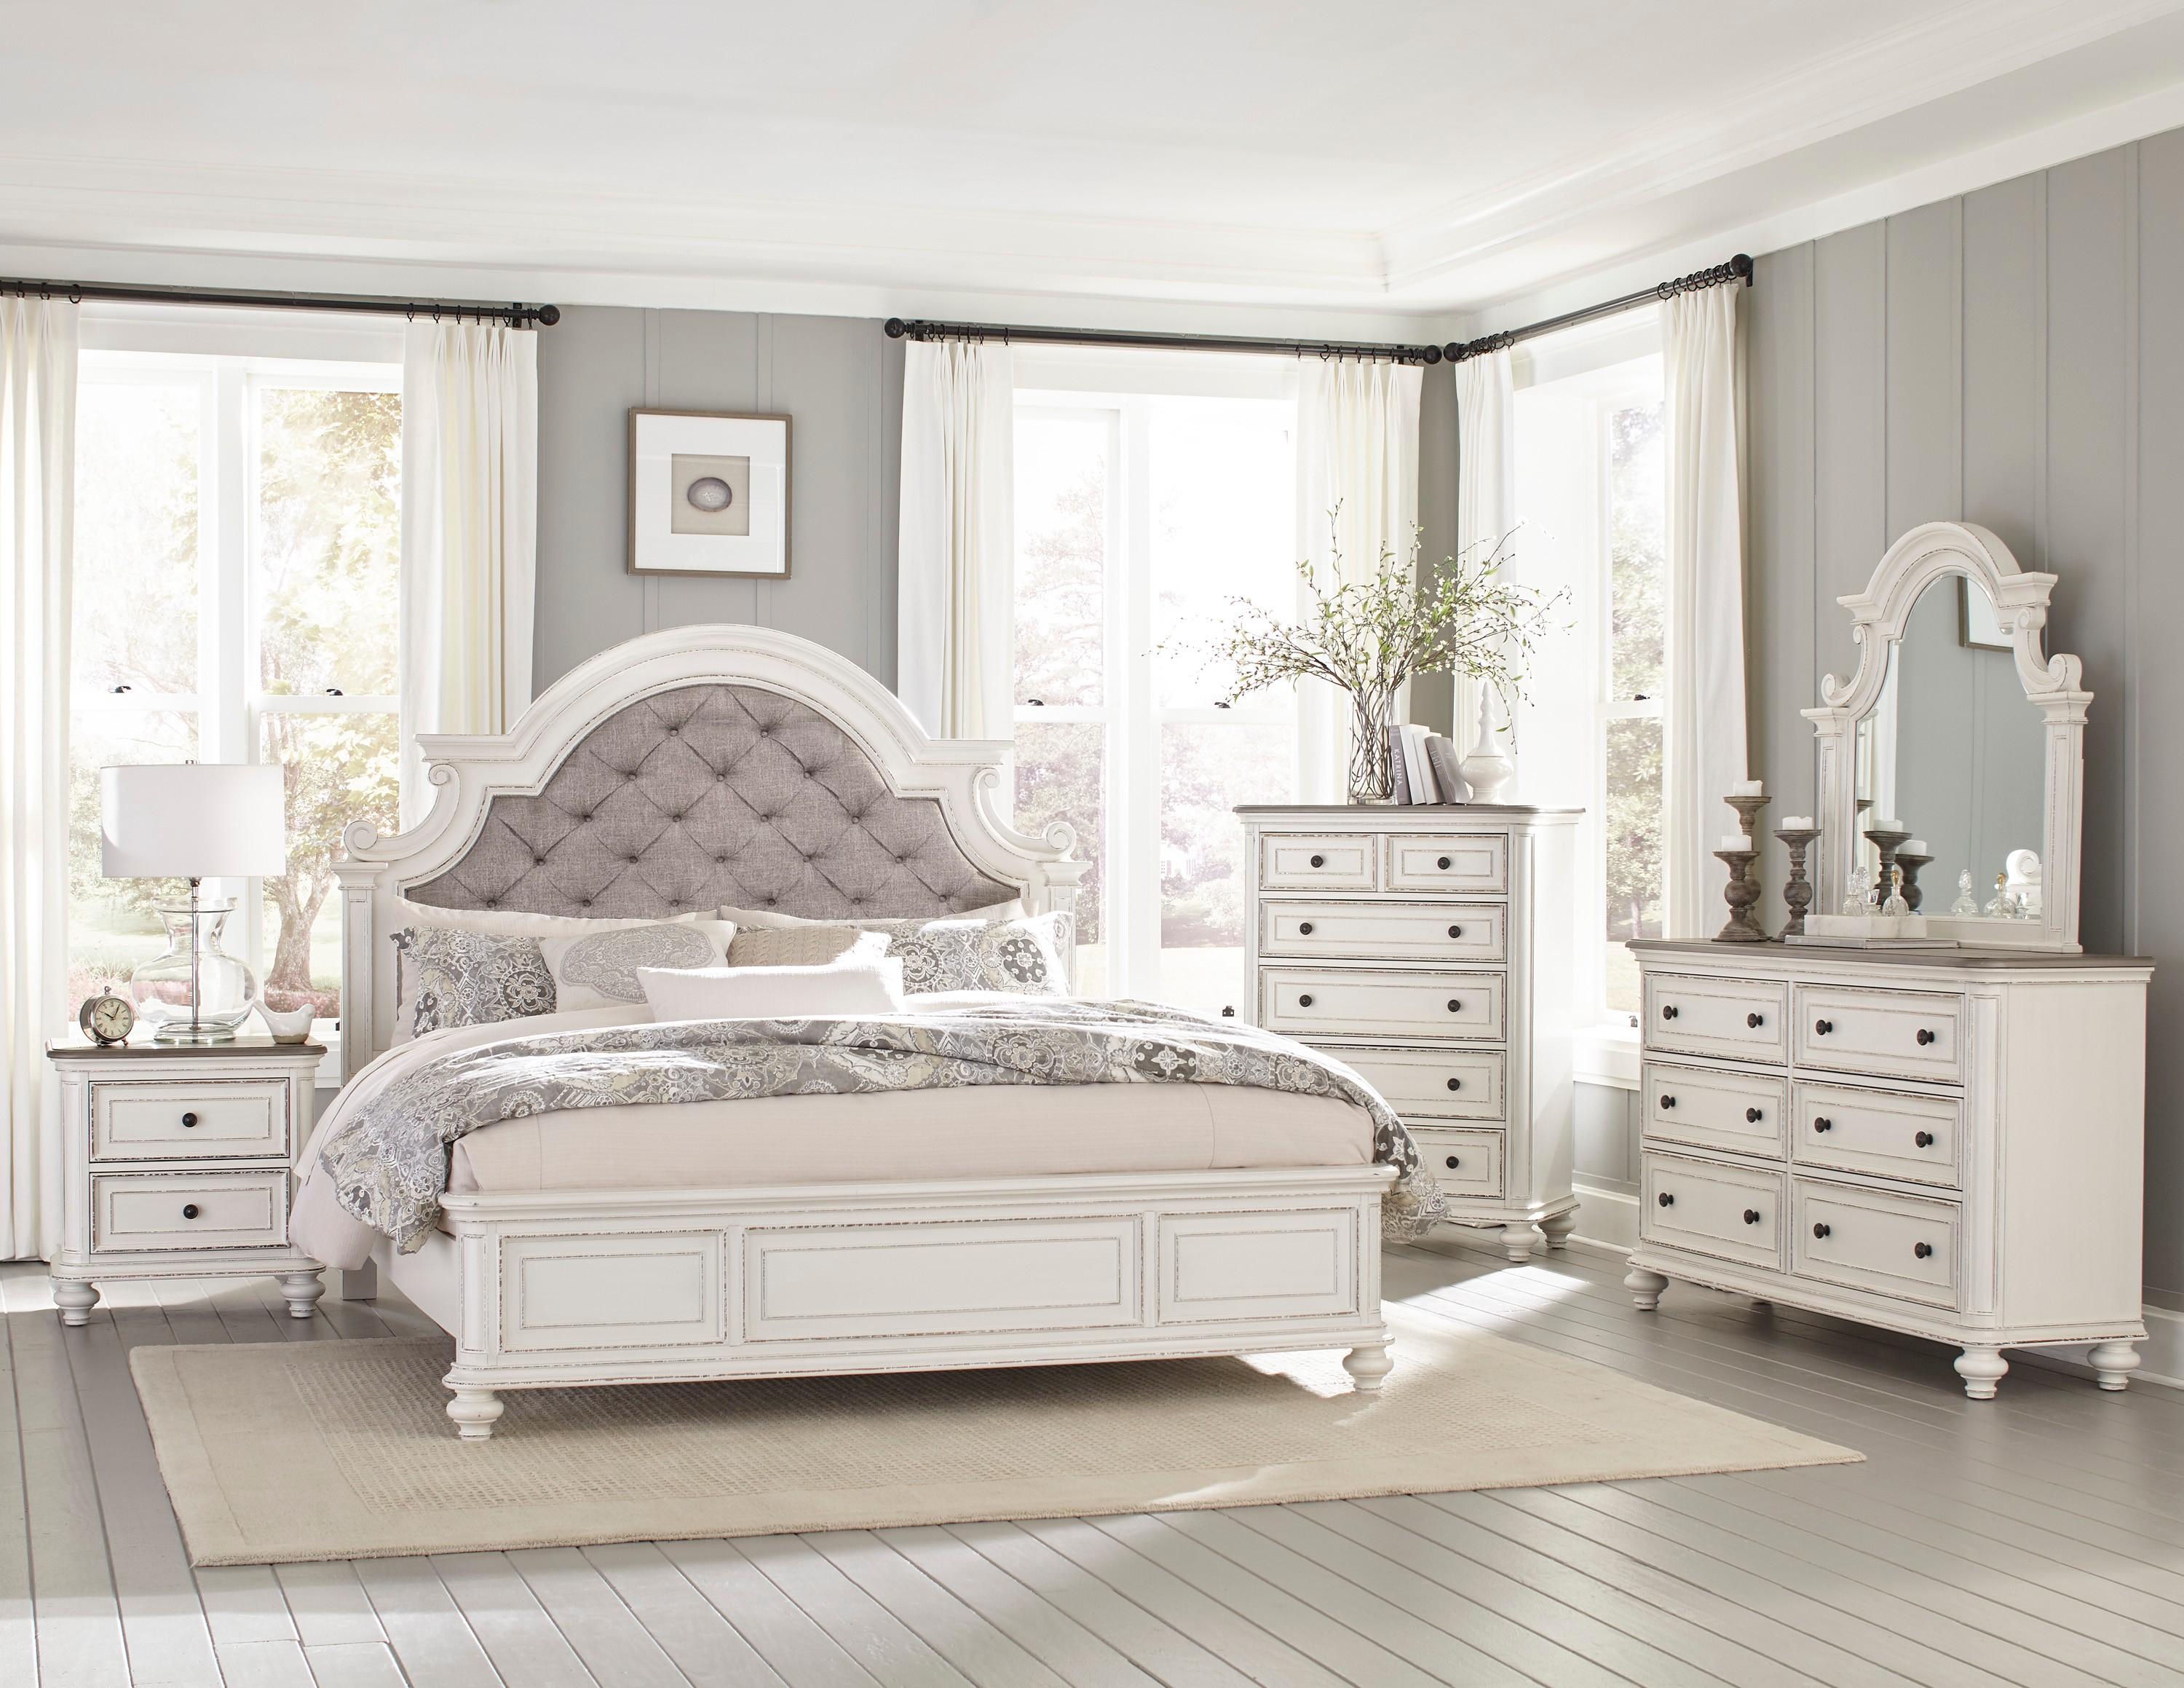 Classic Bedroom Set 1624W-1-5PC Baylesford 1624W-1-5PC in Antique White Polyester